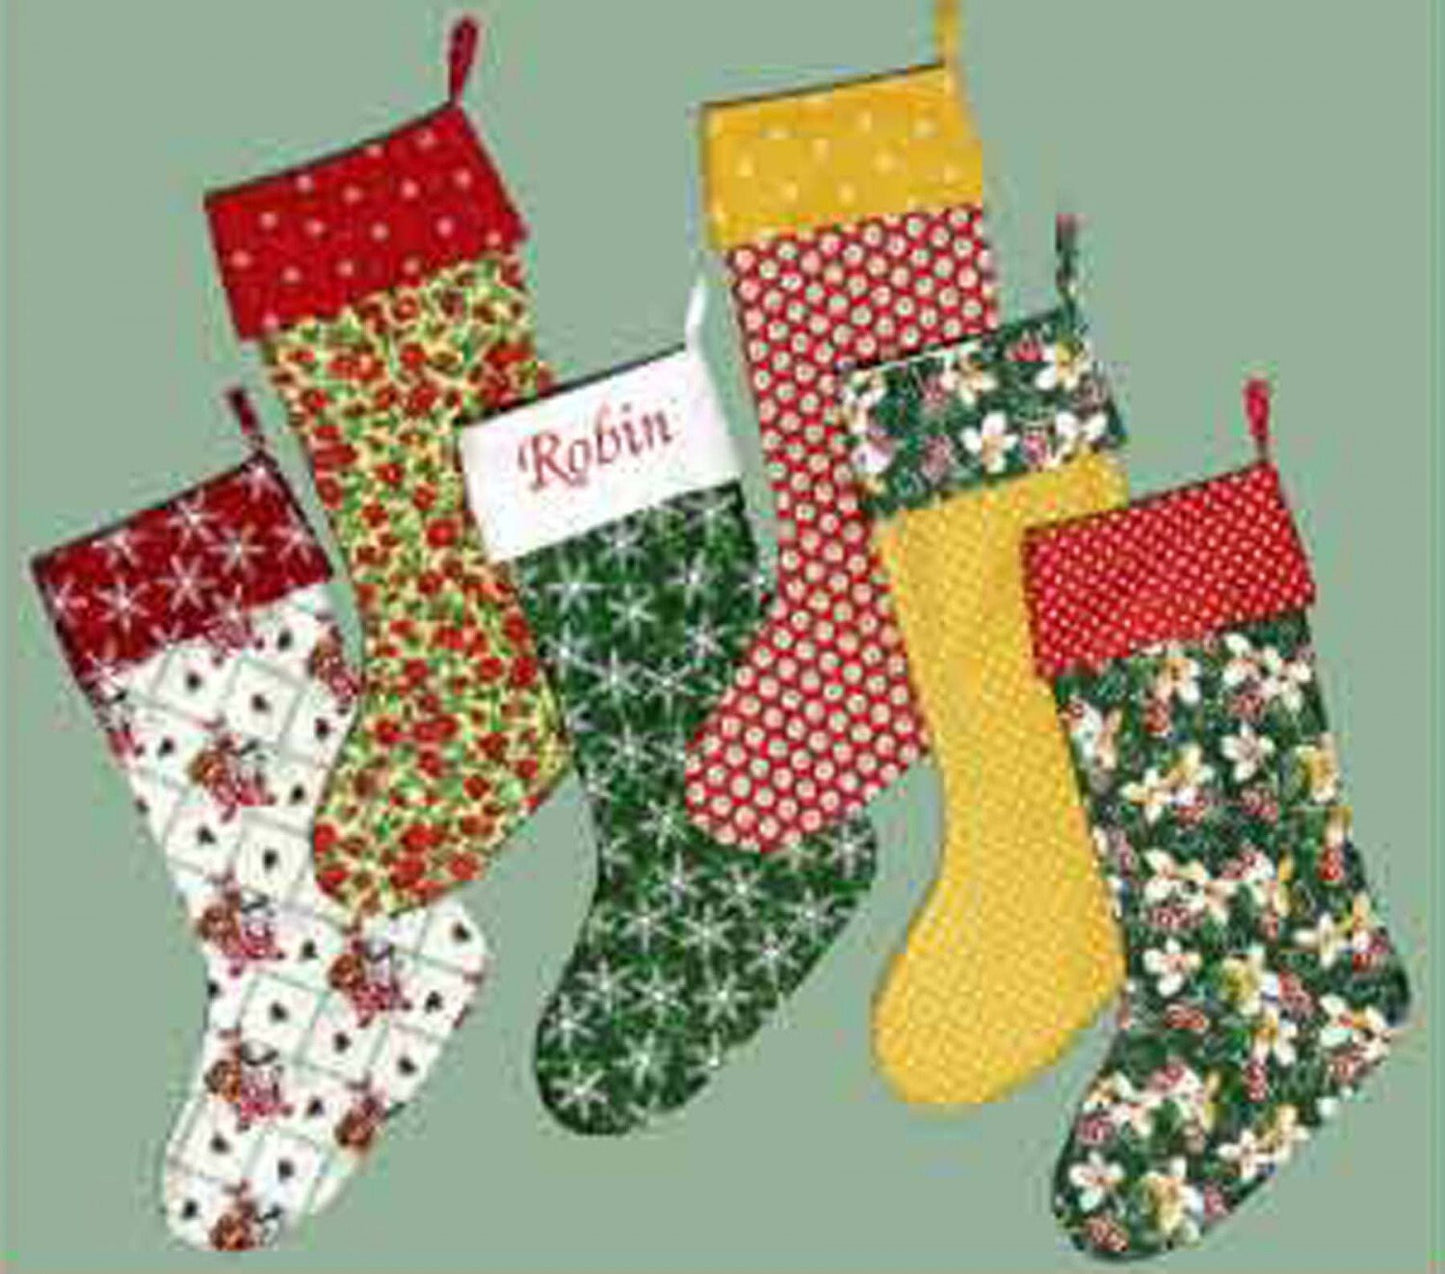 LAST CALL Christmas Stockings Quilt Pattern, Brookshier Design 07739, Lined Quilted Christmas Xmas Stockings Cuff Pattern, Holiday Decor